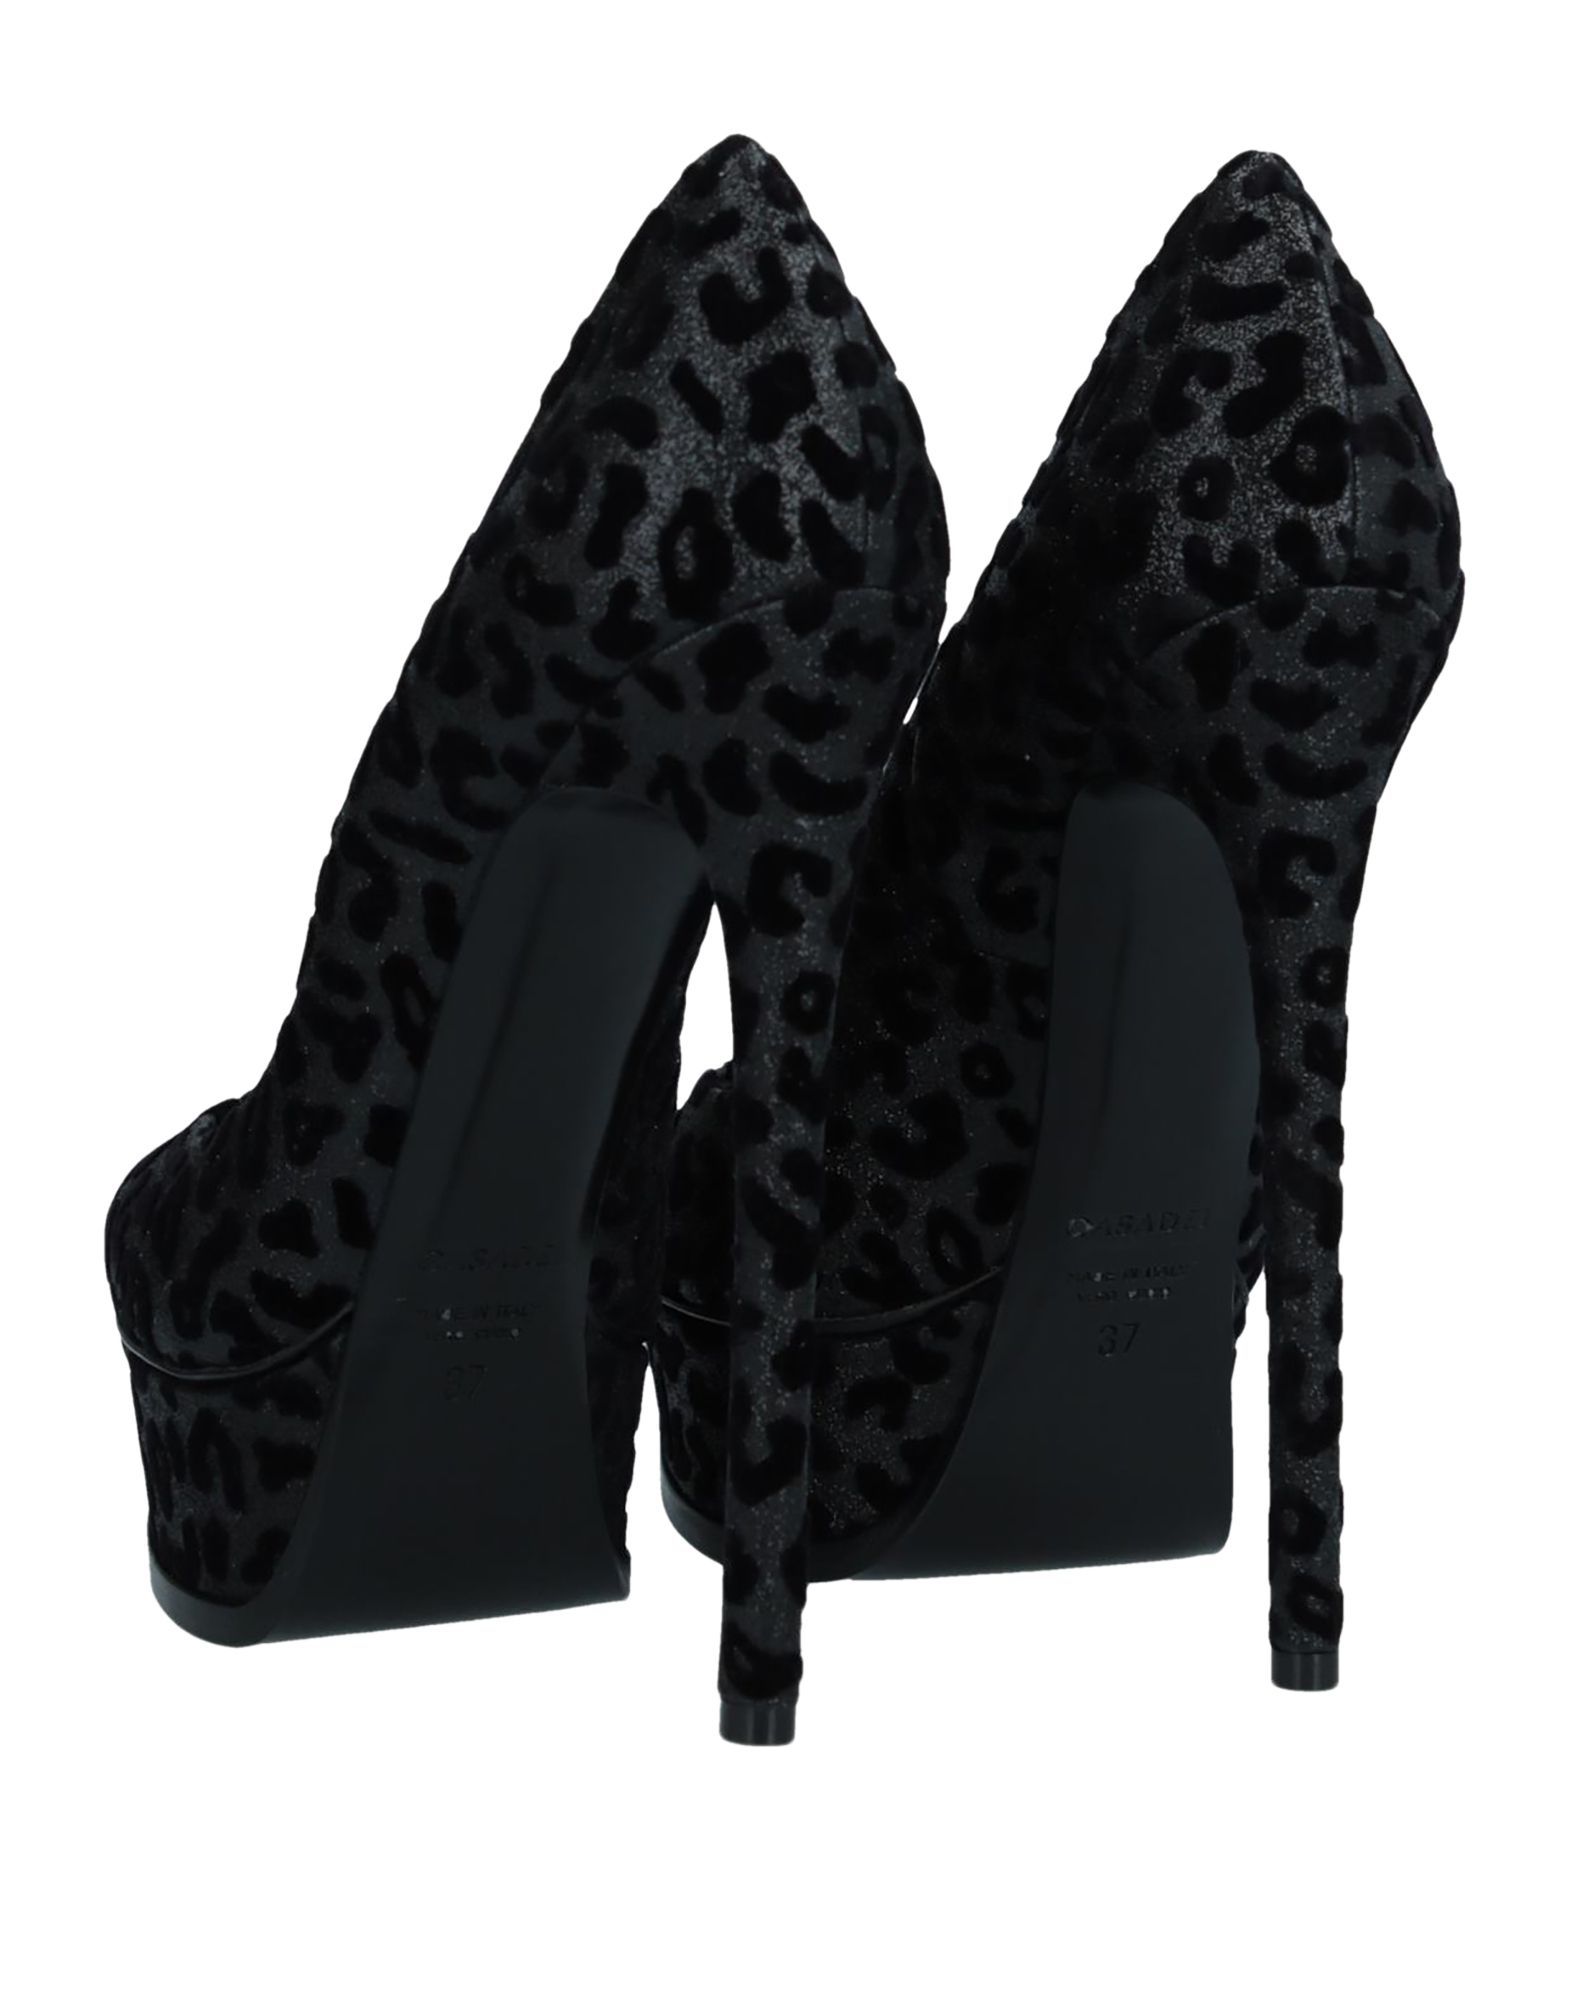 suede effect, glitter, leopard-print, round toeline, stiletto heel, covered heel, leather lining, leather sole, contains non-textile parts of animal origin